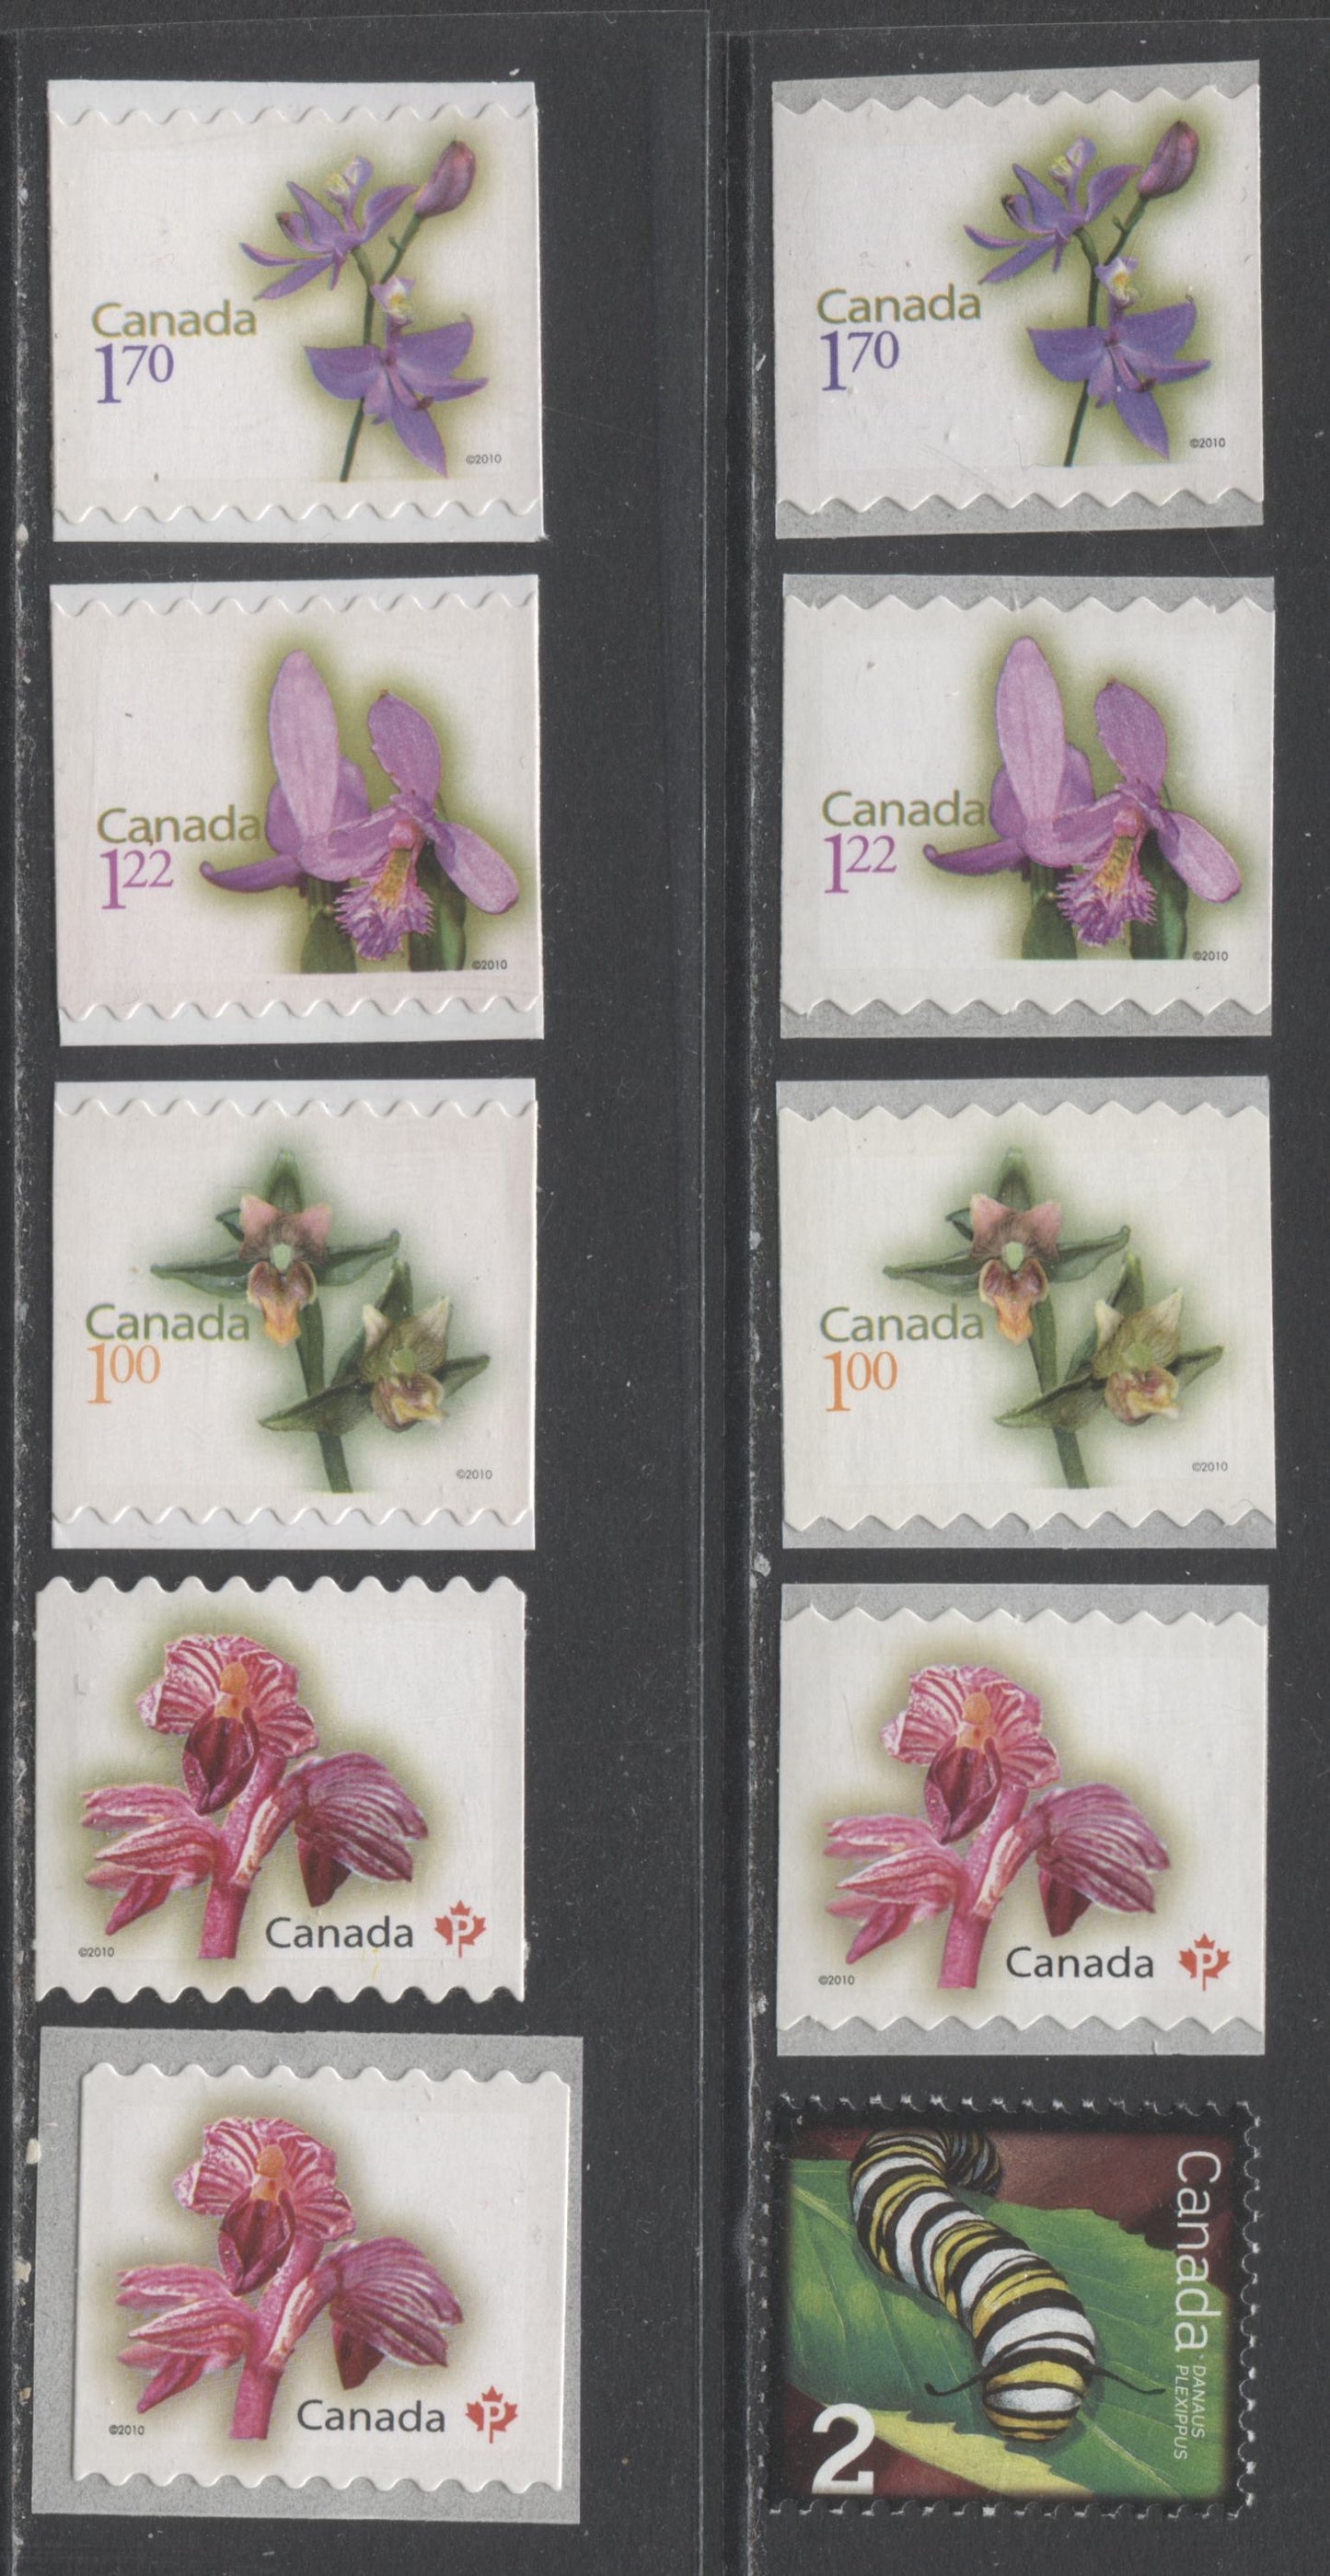 Lot 110 Canada #2328, 2357-2364 2c-$1.70 Multicolored Monarch Caterpillar - Grass Pink, 2010 Permanents, 9 VFNH Coil & Booklet Stamps Includes Die Cut To Shape #2361